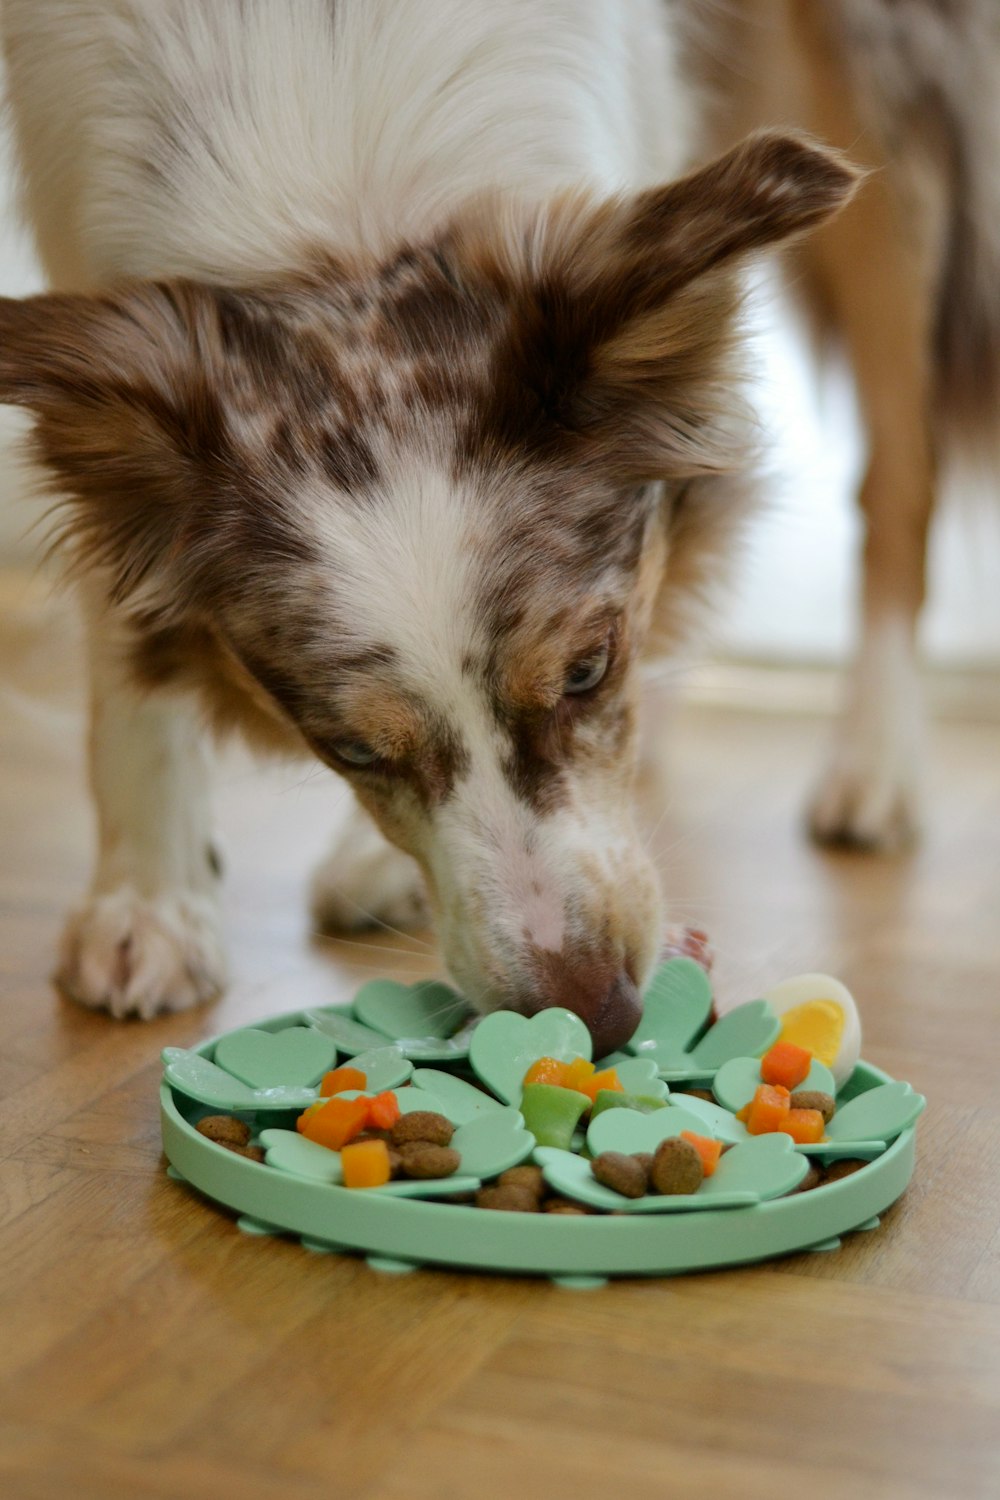 a dog sniffing a plate of food on the floor